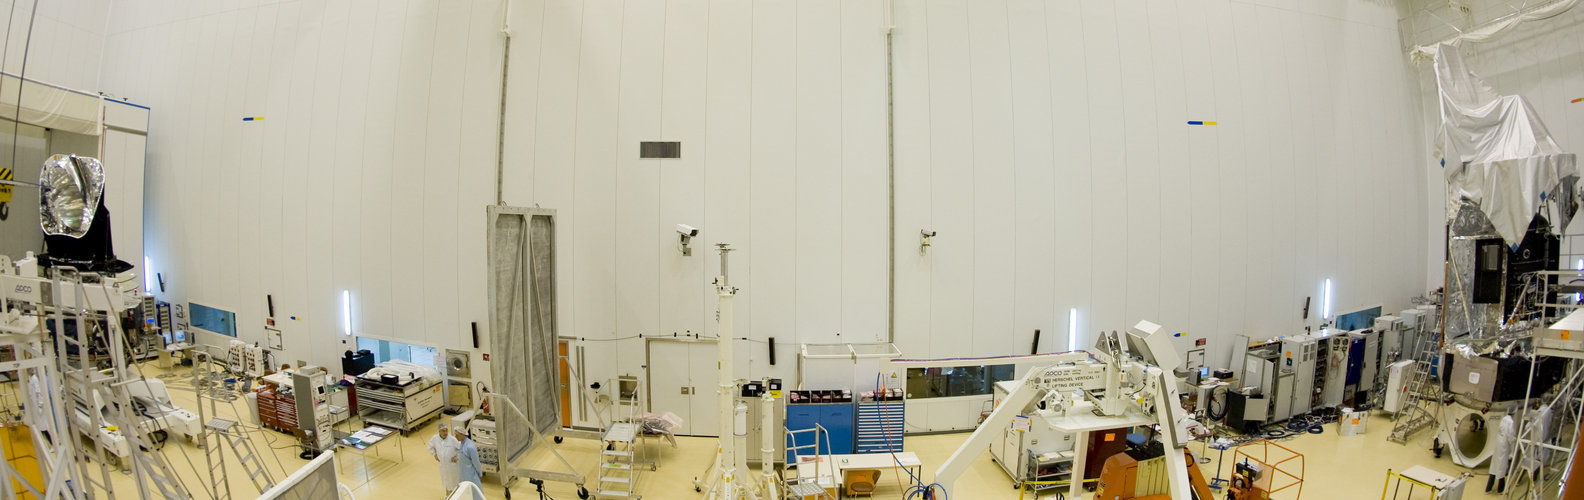 Fish-eye view of Herschel and Planck in a clean room at launch site